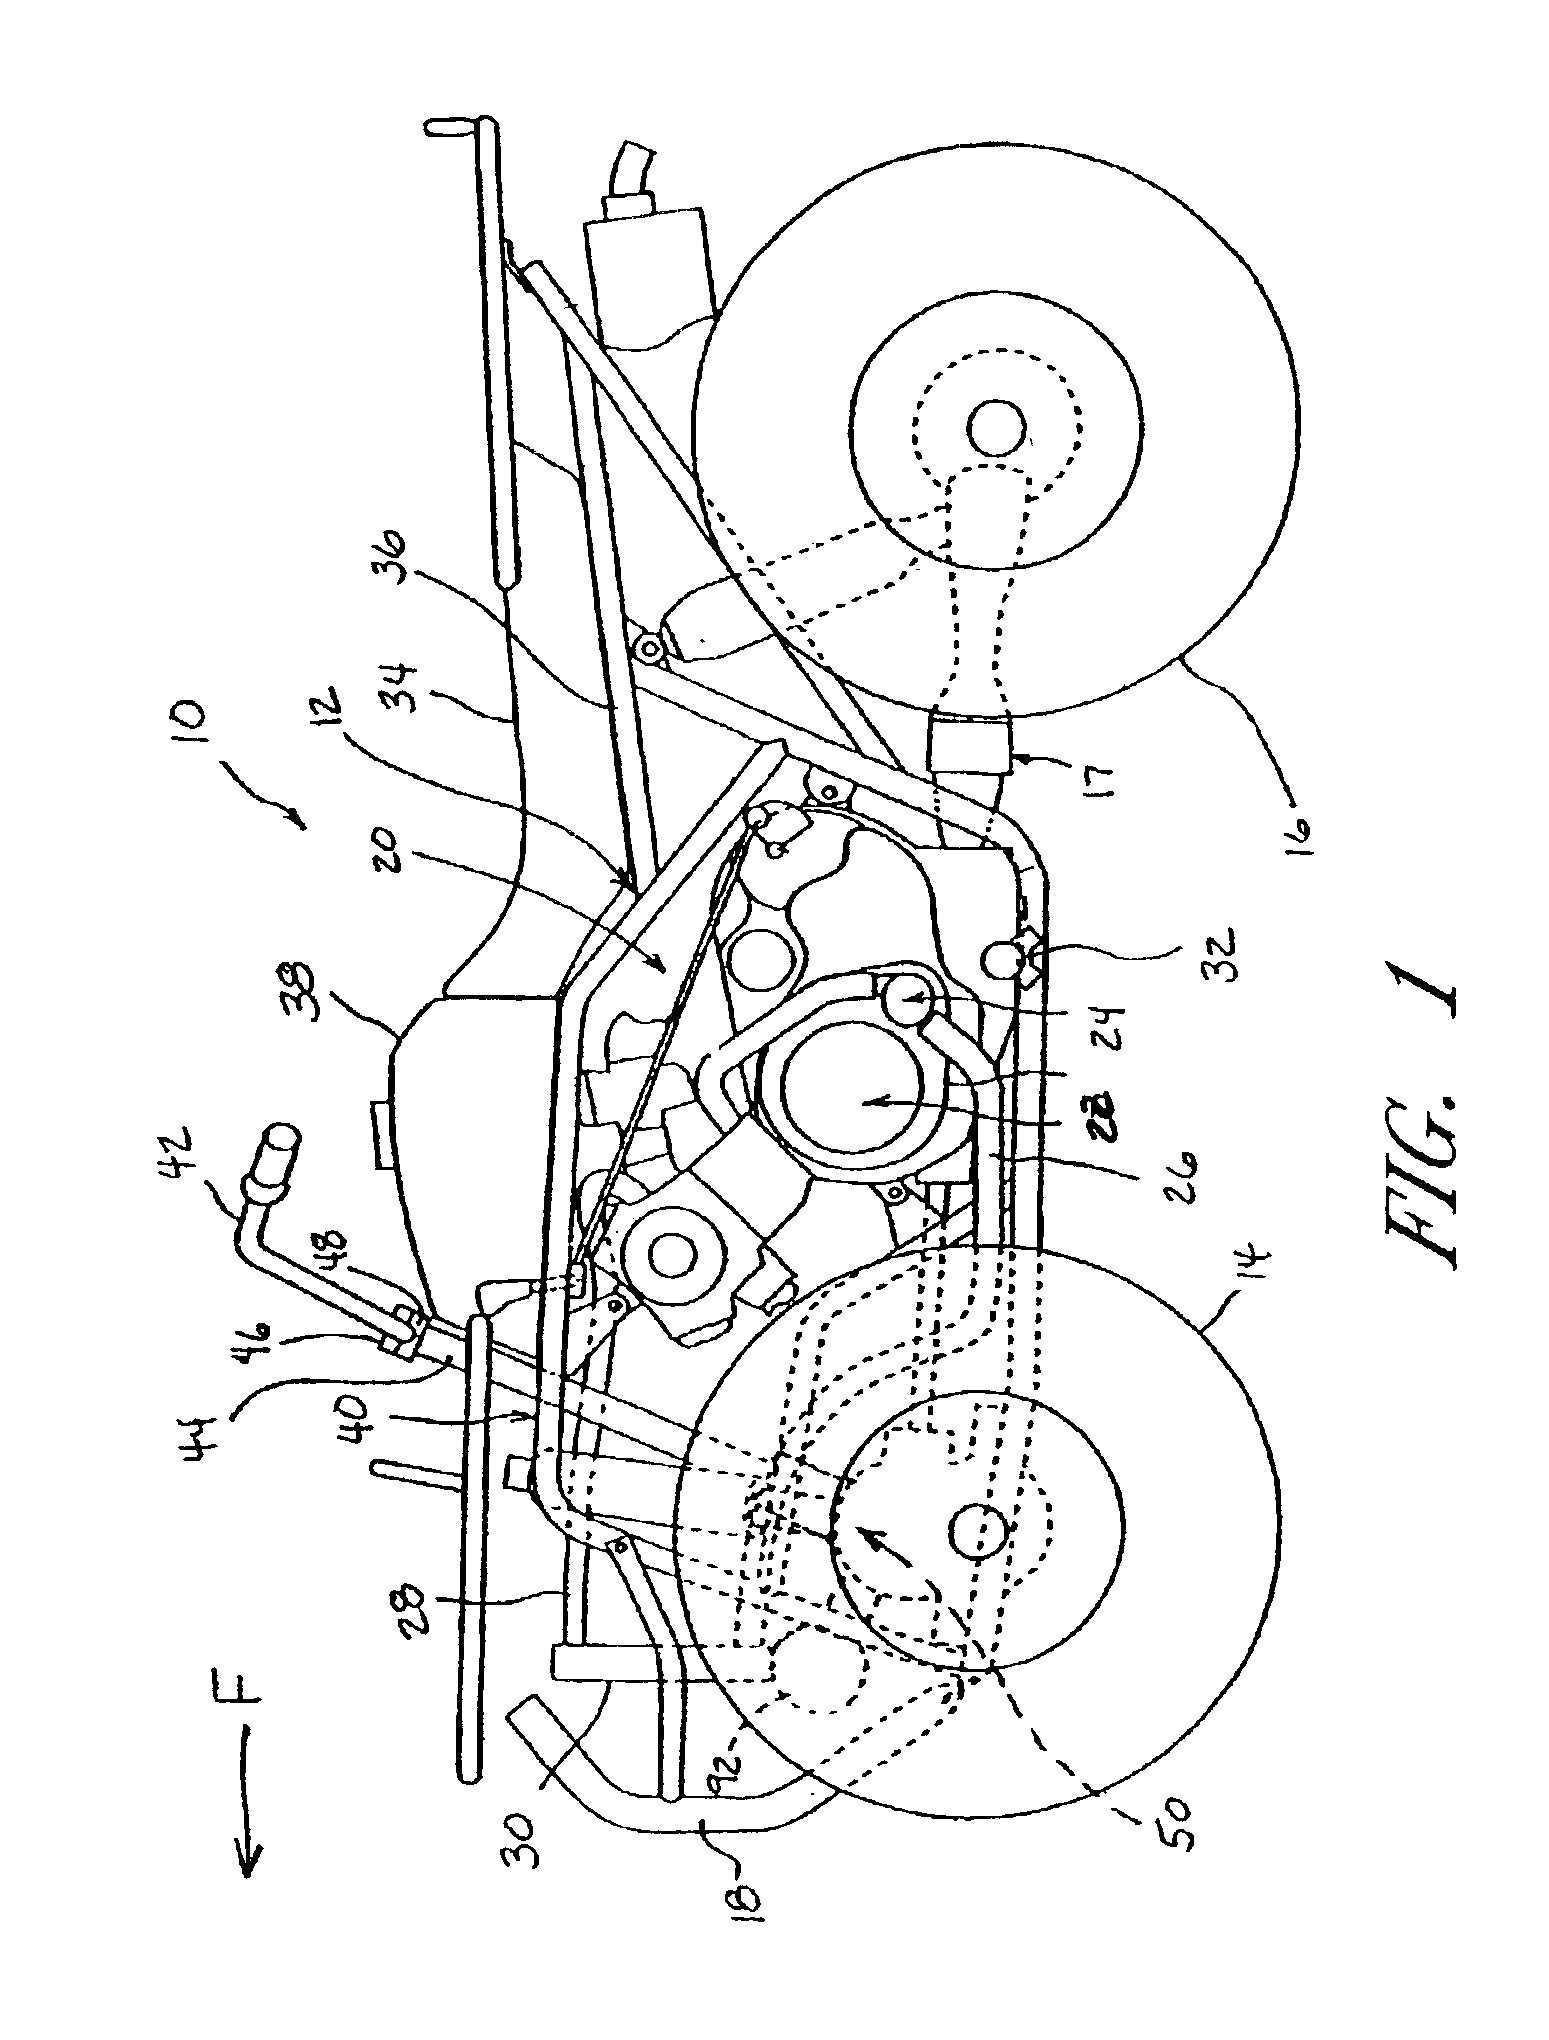 Power assisted steering for all terrain vehicle